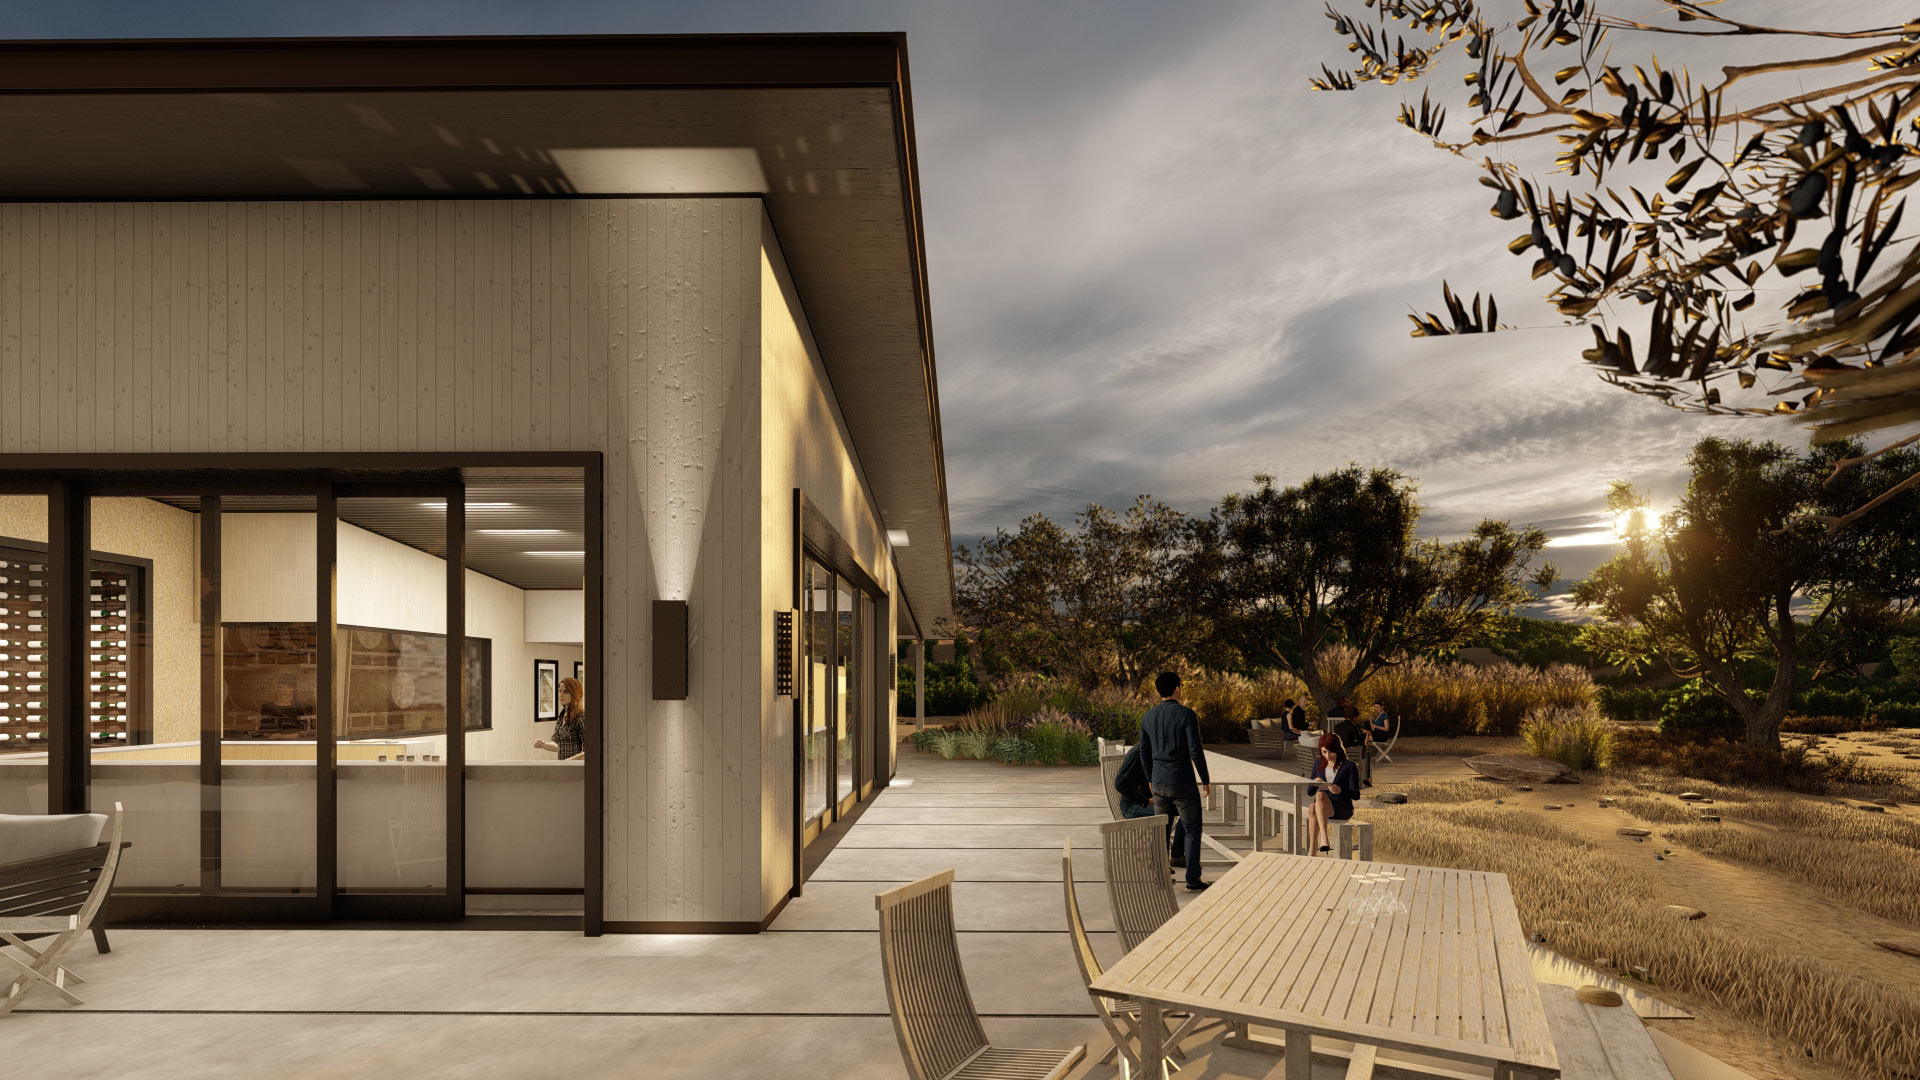 Winery image from the outside | Lumion rendering